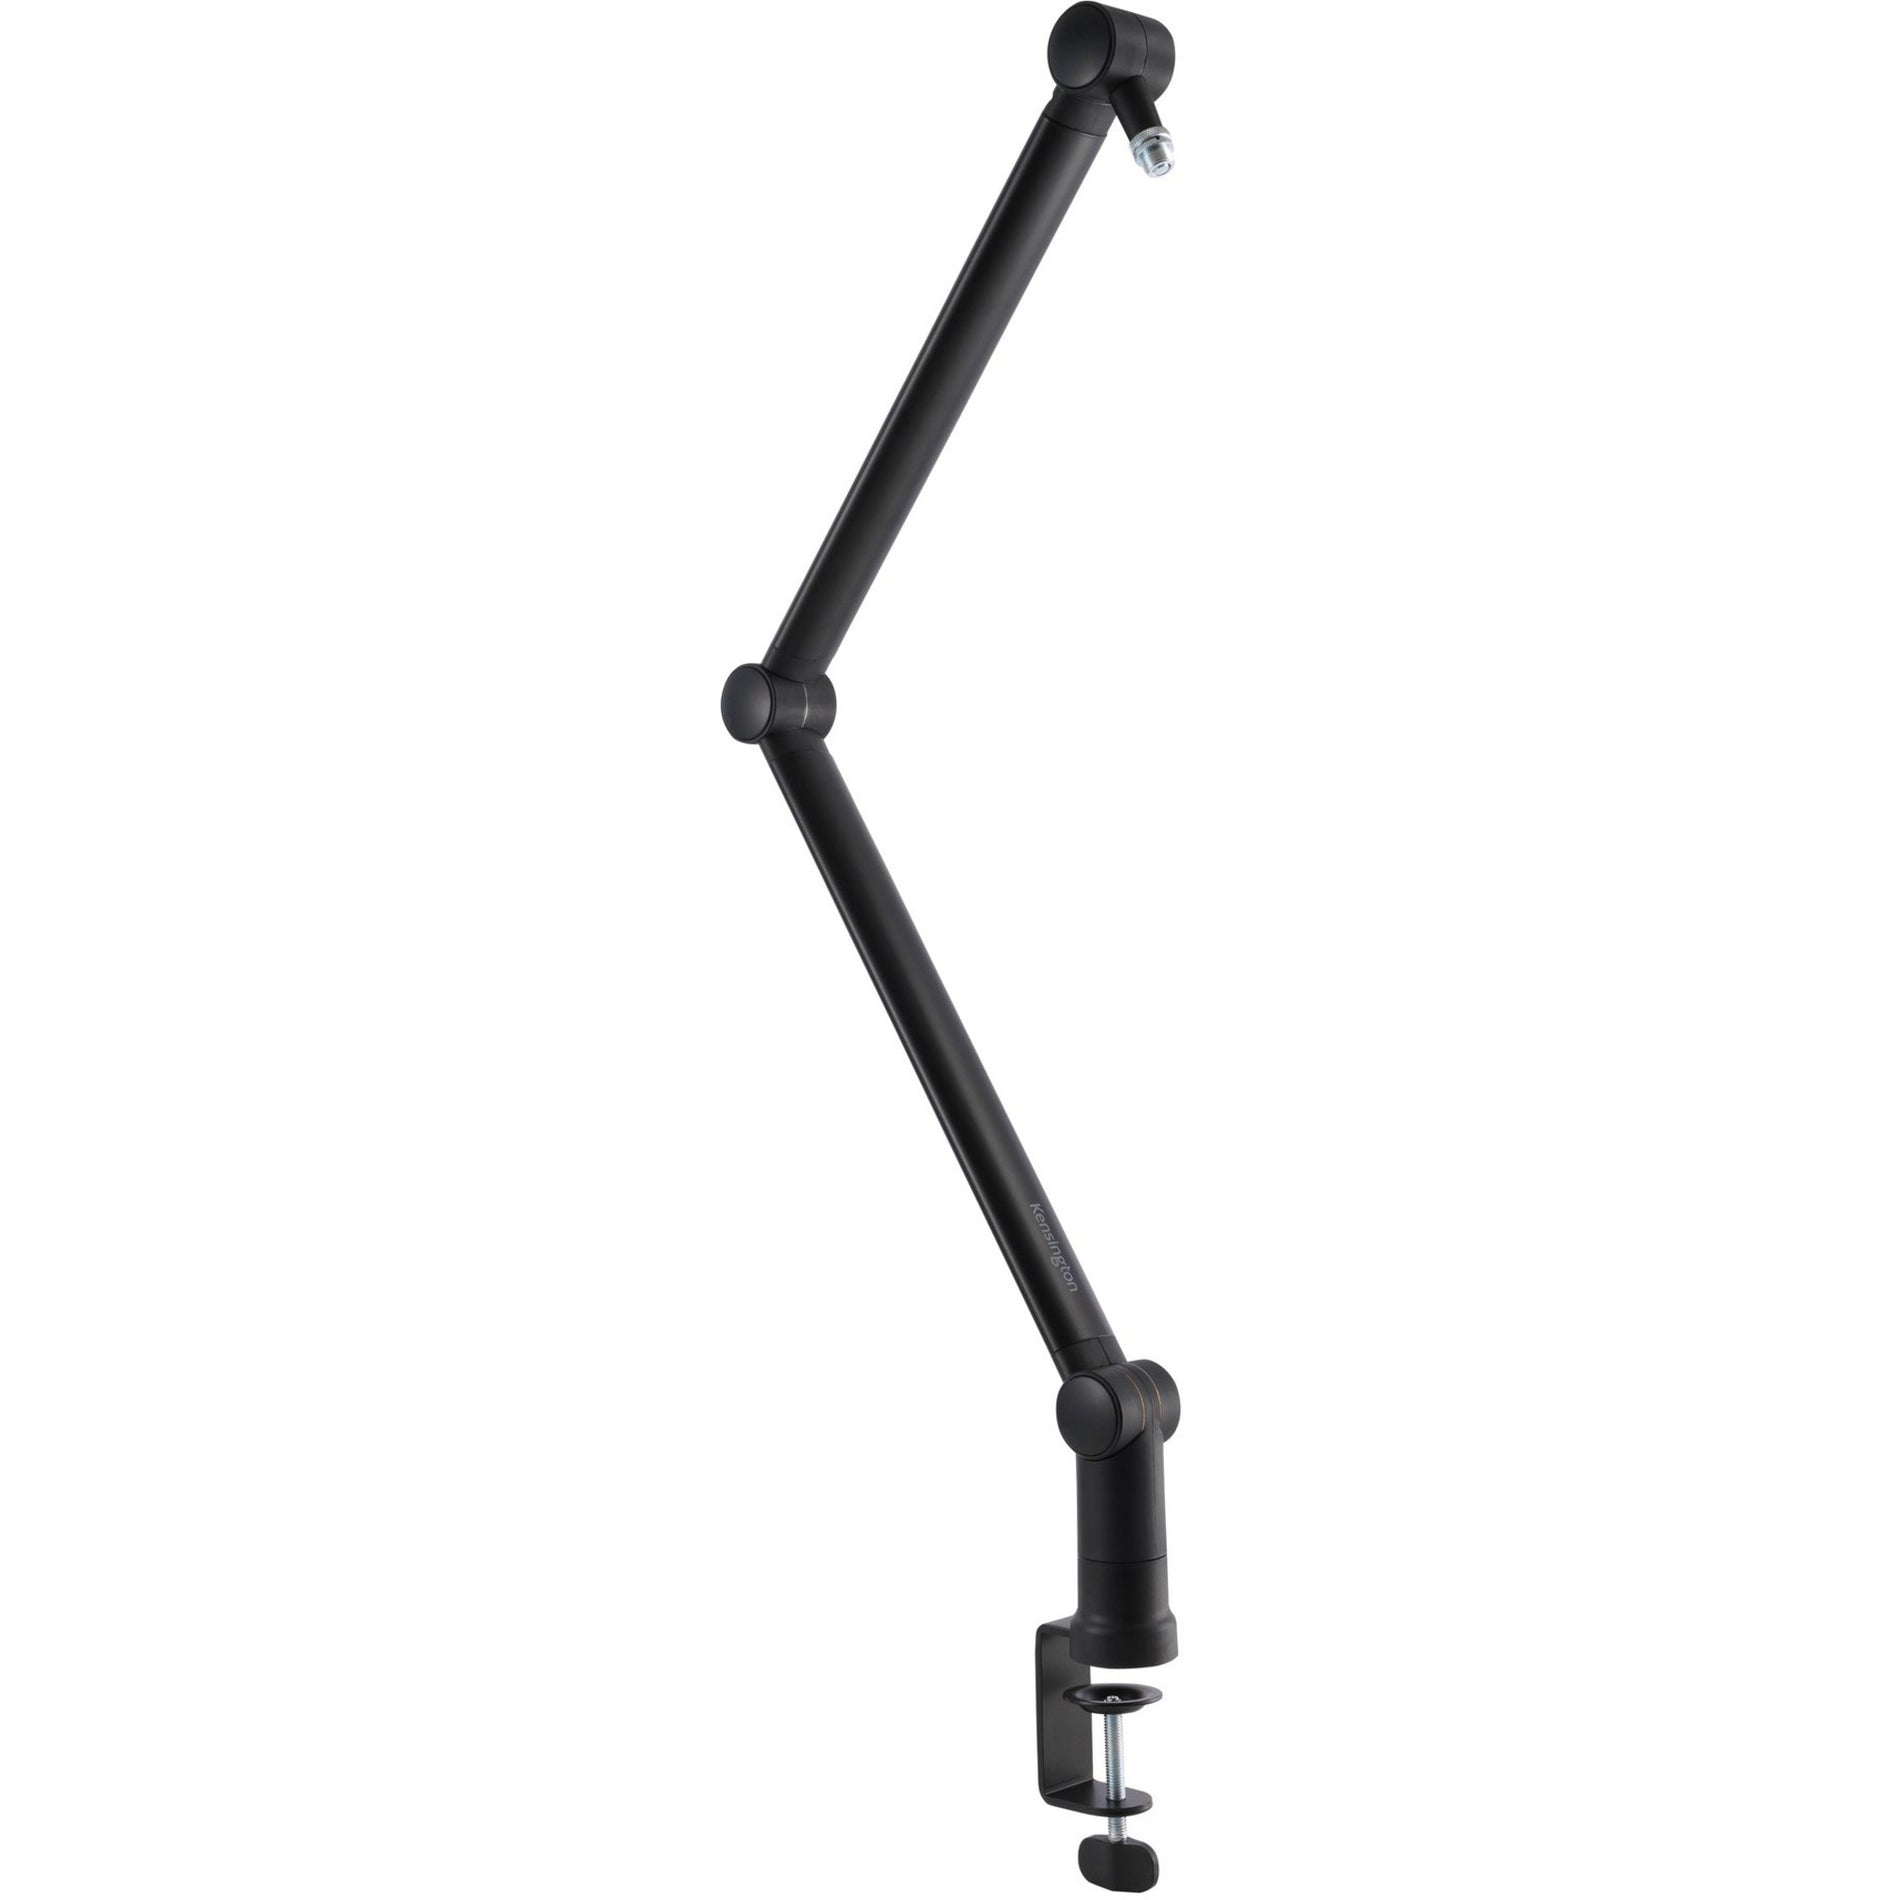 Kensington K87652WW A1020 Boom Arm for Microphones, Webcams, and Lighting Systems